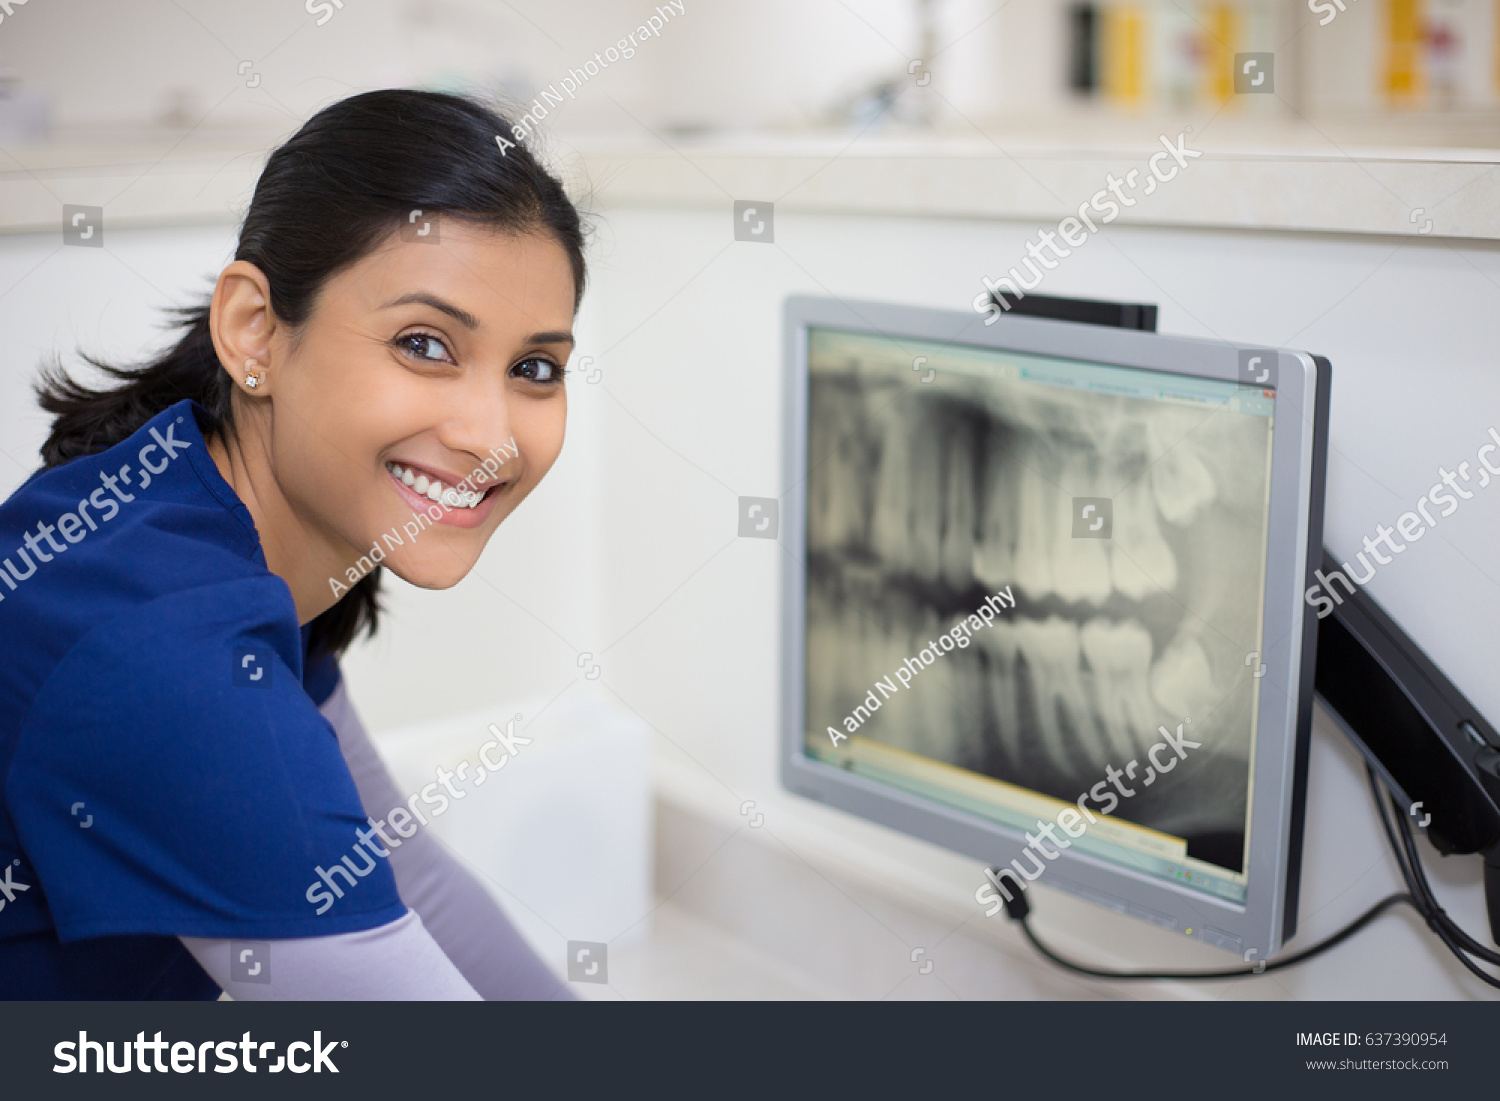 Closeup portrait of allied health dental professional in blue scrubs examining dental x-ray on computer screen, isolated dentist office #637390954